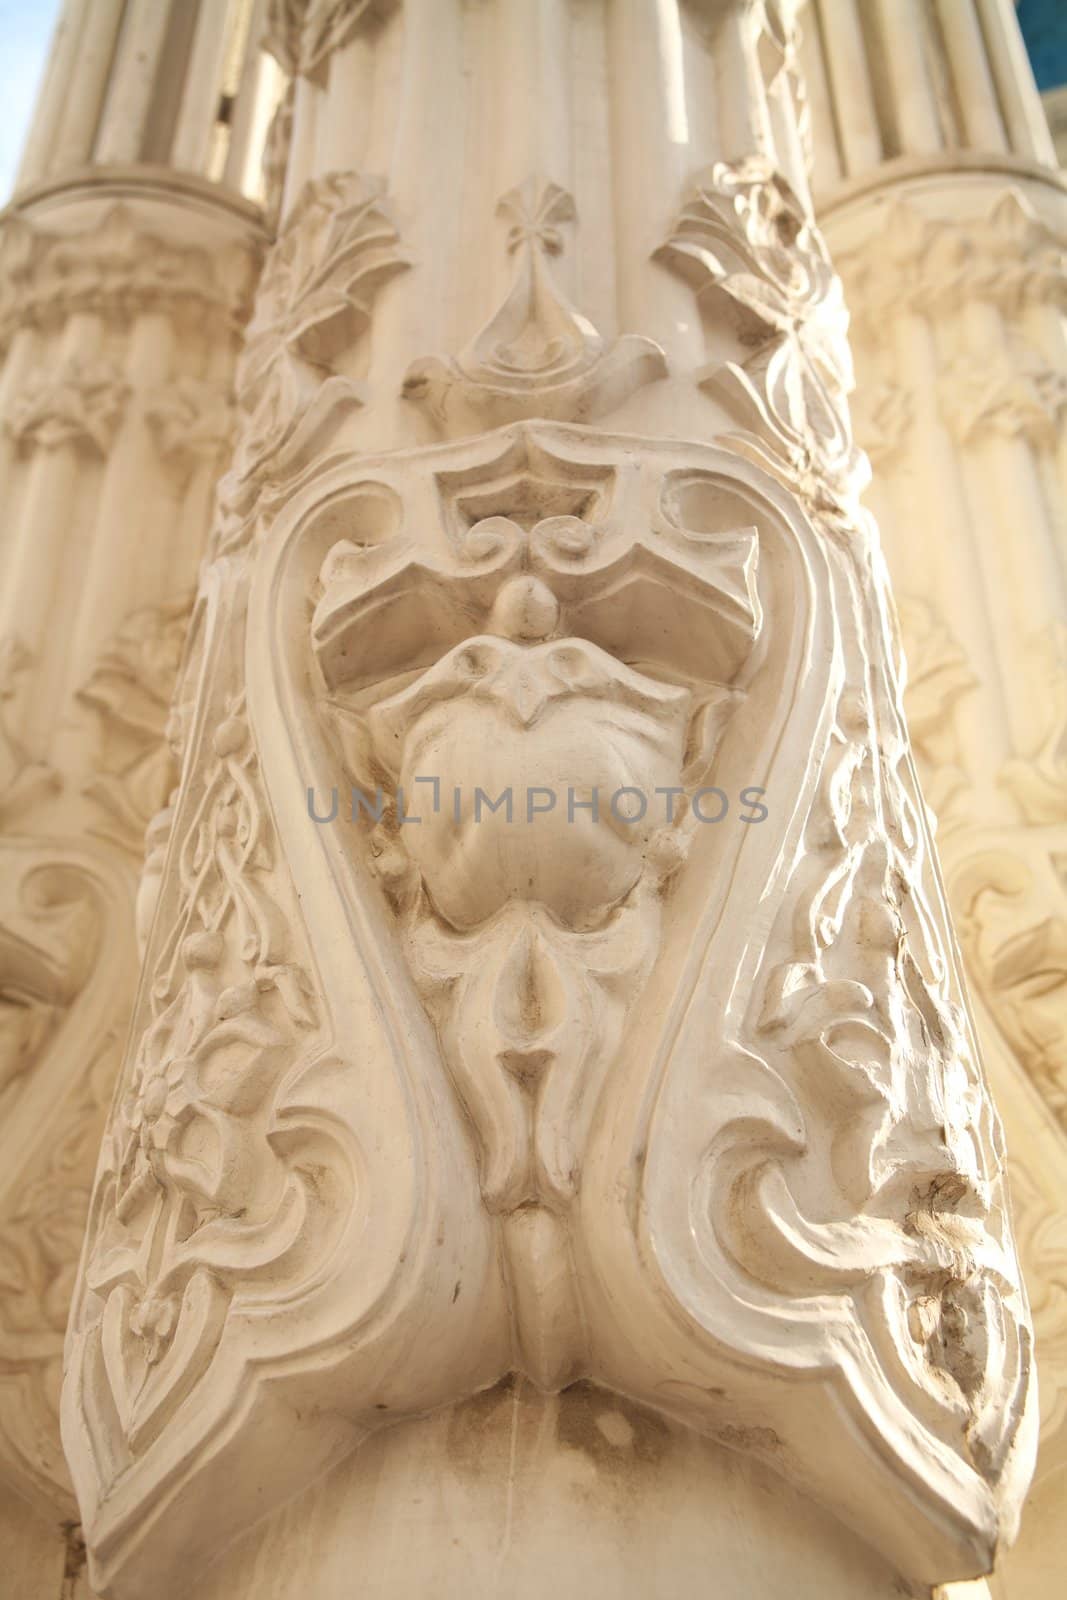 Moscow, Russia, Architecture, Fragment of the Pillars of the Building 30's, Decorative Elements